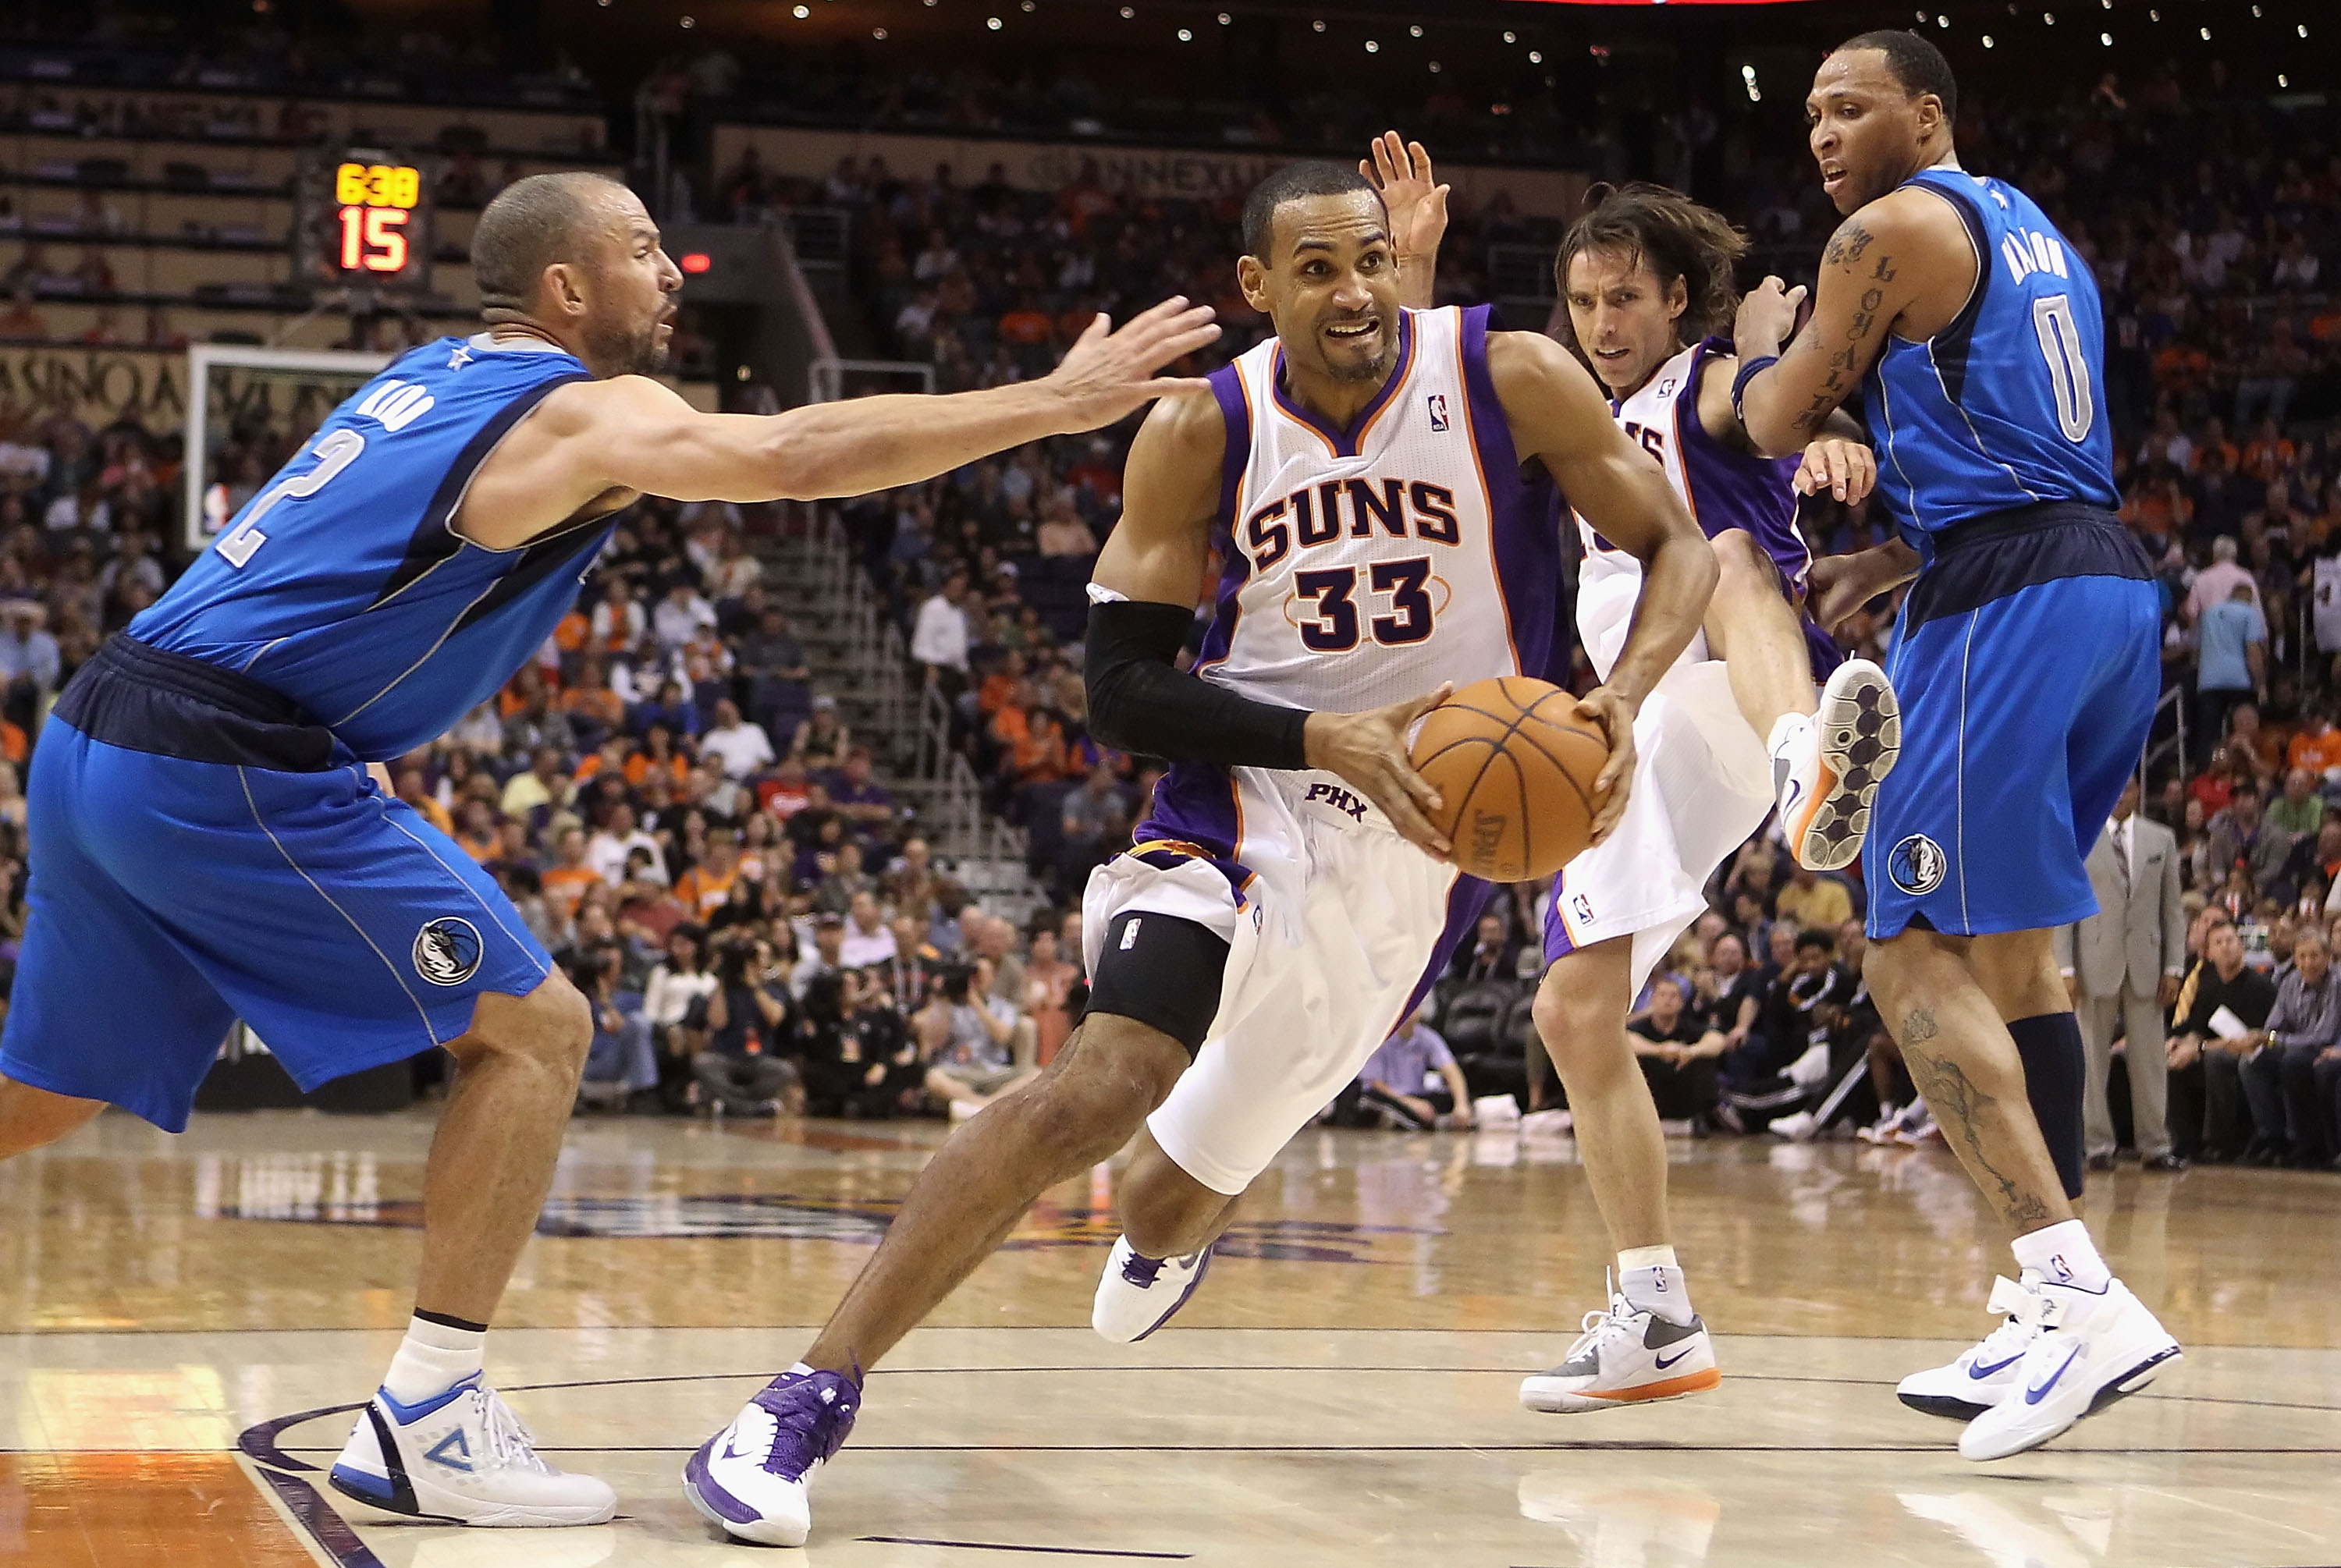 PHOENIX, AZ - MARCH 27:  Grant Hill  #33 of the Phoenix Suns drives the ball past  Jason Kidd #2 of the Dallas Mavericks during the NBA game at US Airways Center on March 27, 2011 in Phoenix, Arizona.  The Mavericks defeated the Suns 91-83.  NOTE TO USER: